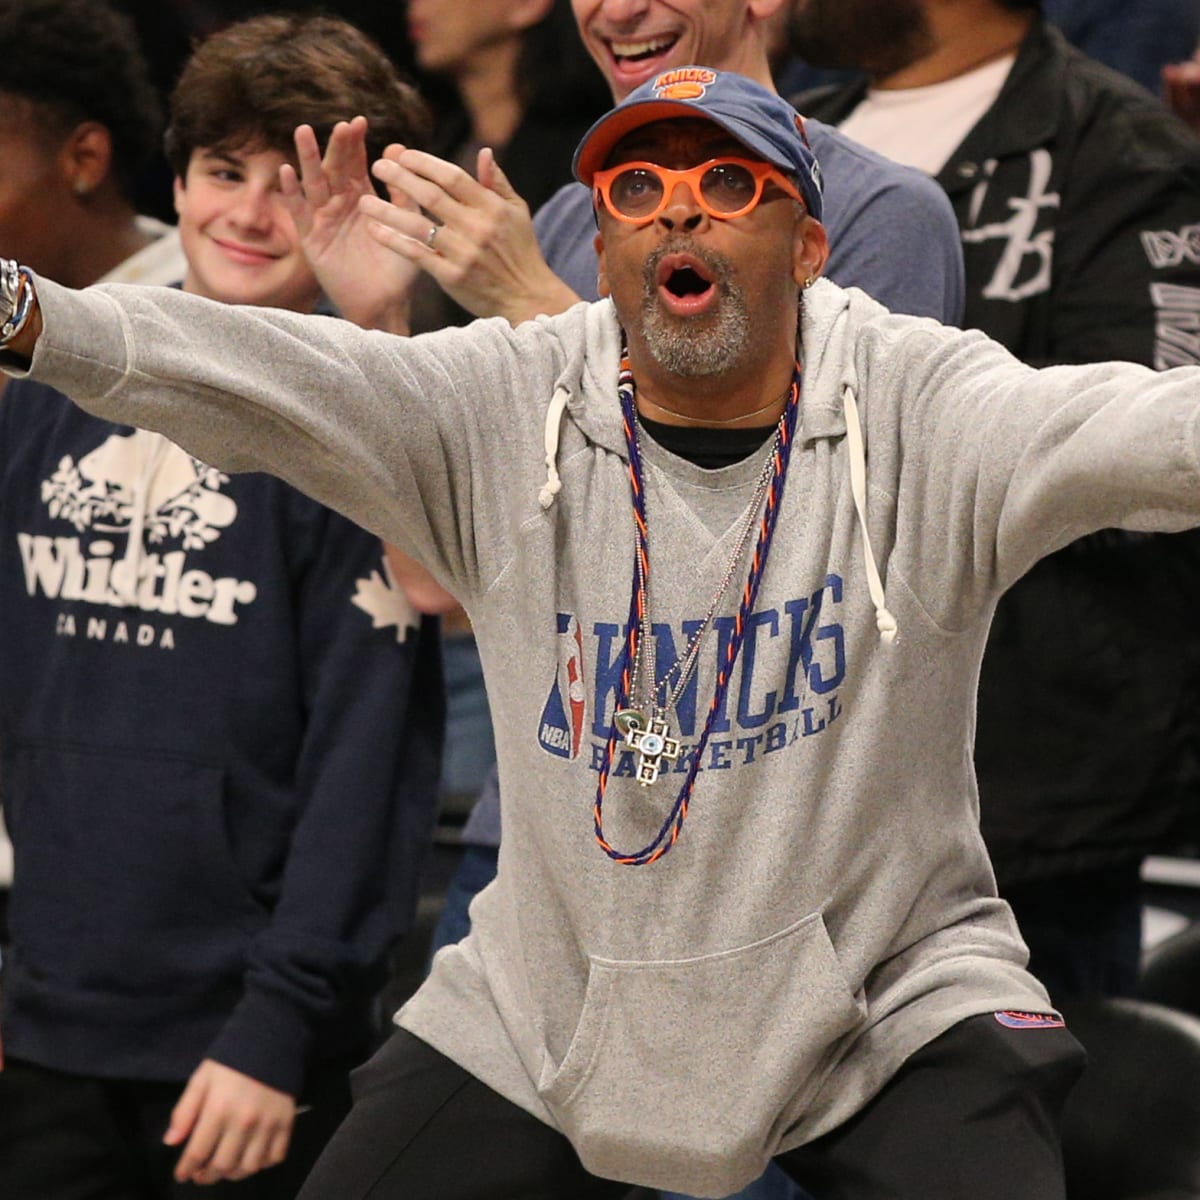 Spike Lee just wants peace after things got chippy between Knicks and Cavs